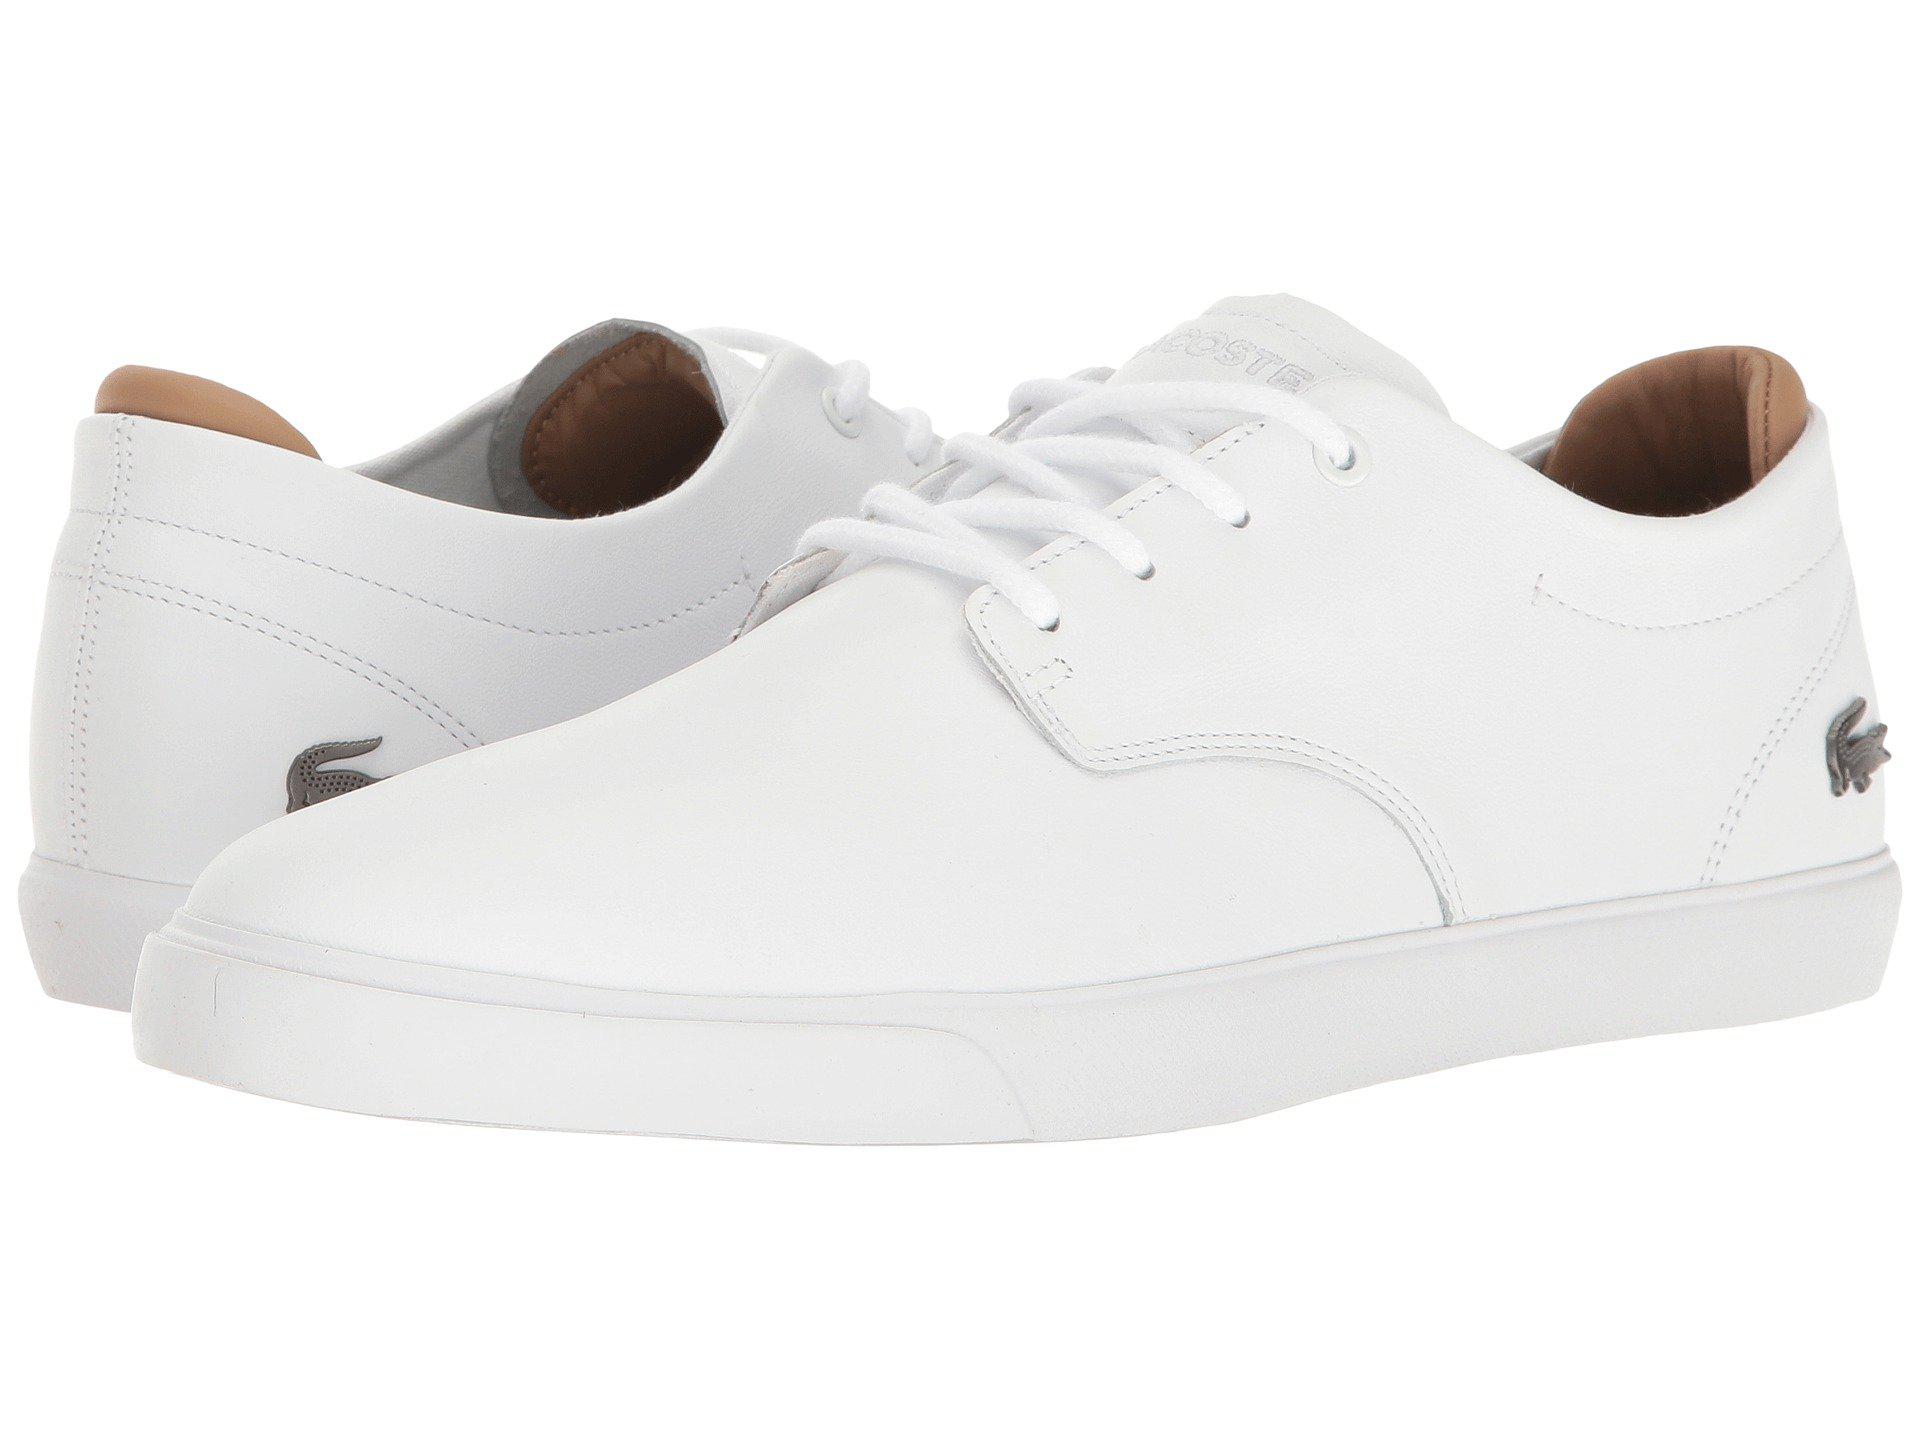 Lacoste Leather Espere 117 1 Cam in White for Men - Lyst